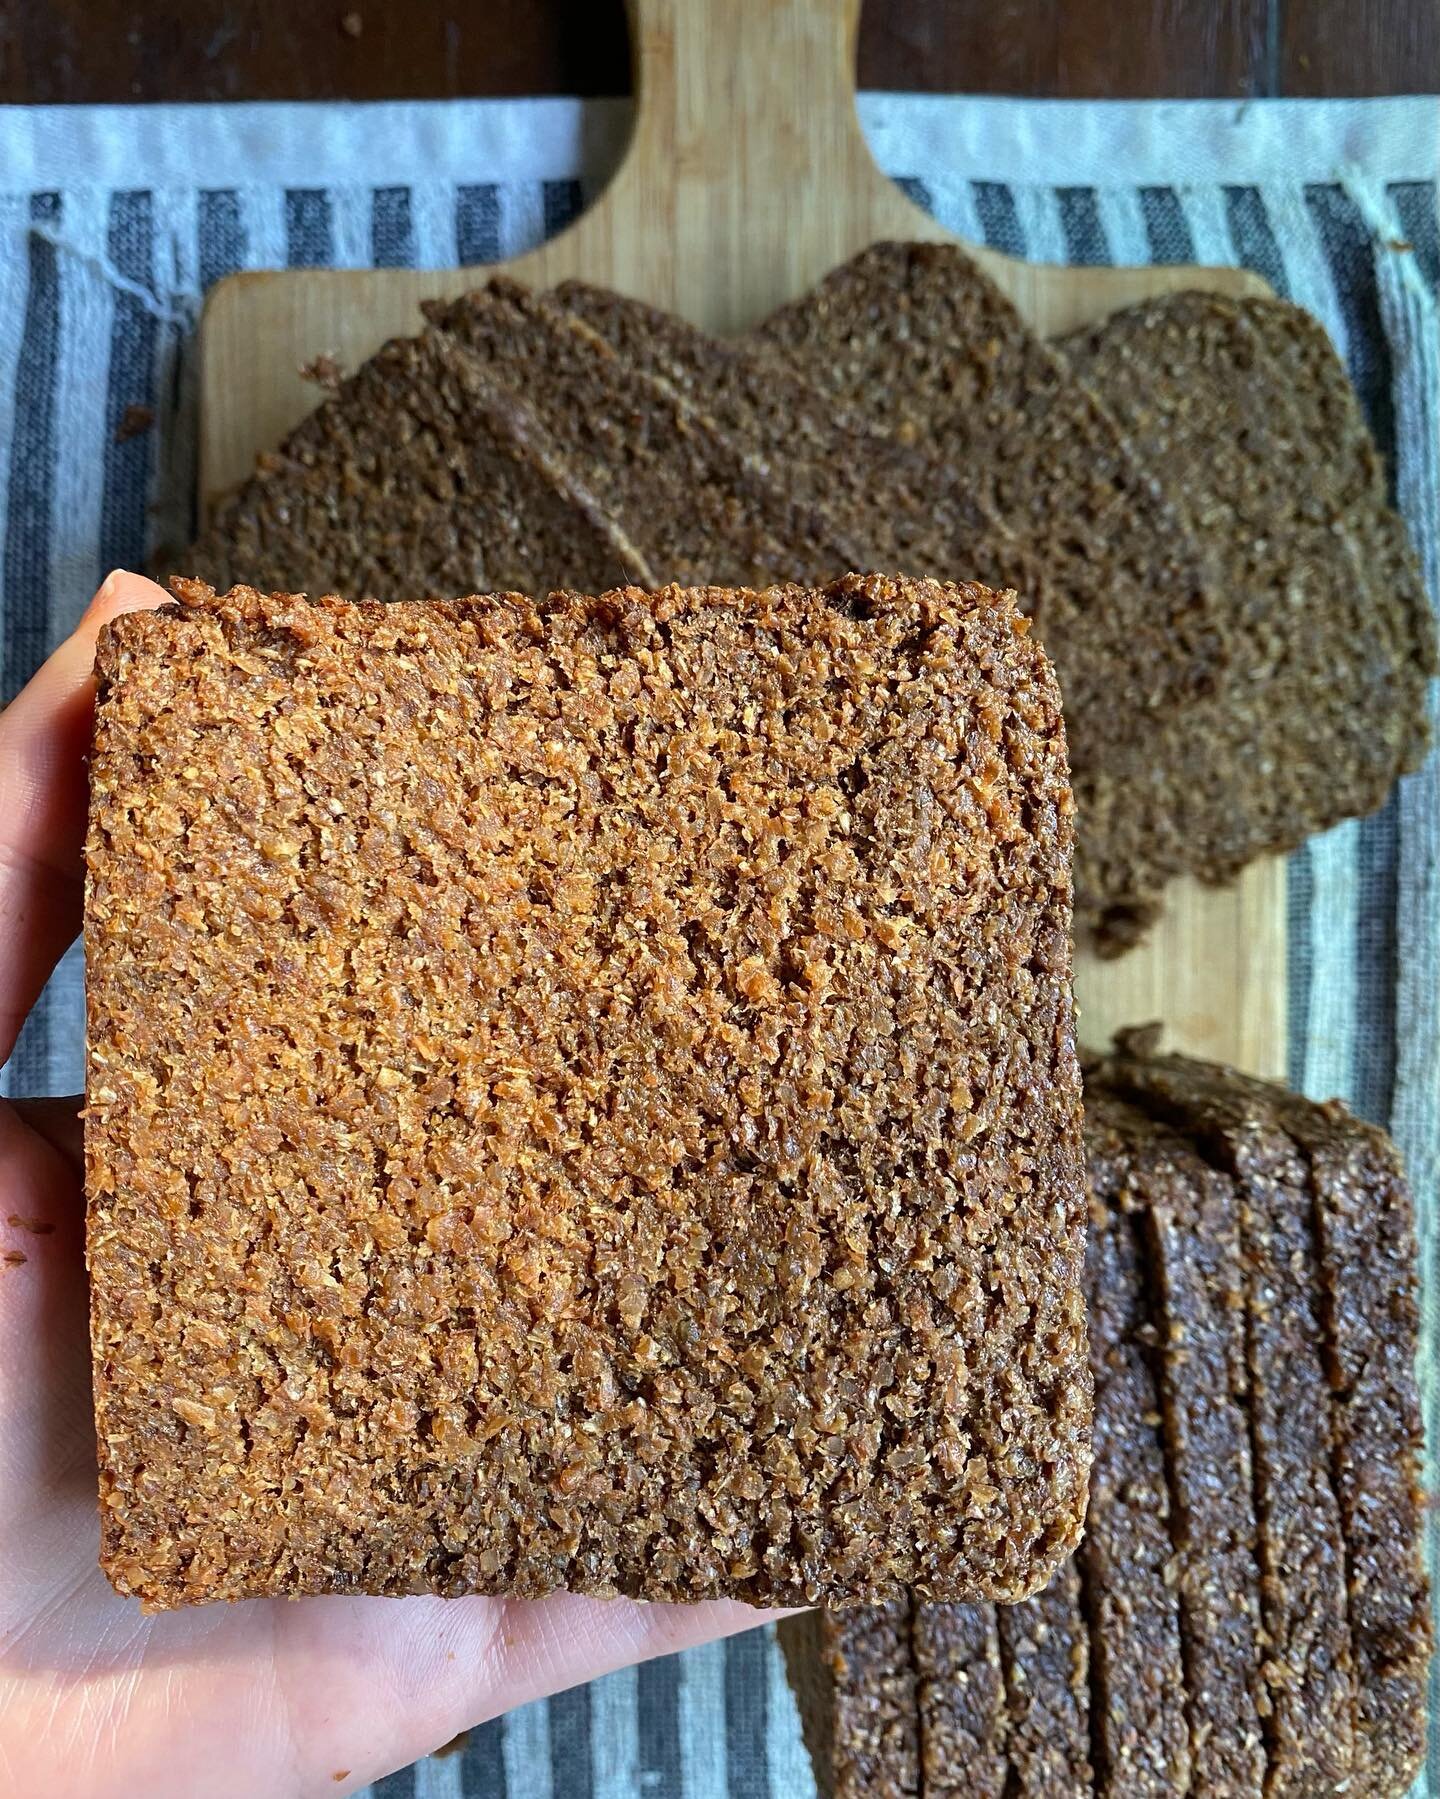 Sprouted Grain Breads 🤍

I had so many questions about this sprouted bread from my stories yesterday so I thought I&rsquo;d write a quick post about it. Nutritionally speaking, it&rsquo;s pretty hard to beat sprouted grain loaves when it comes to br